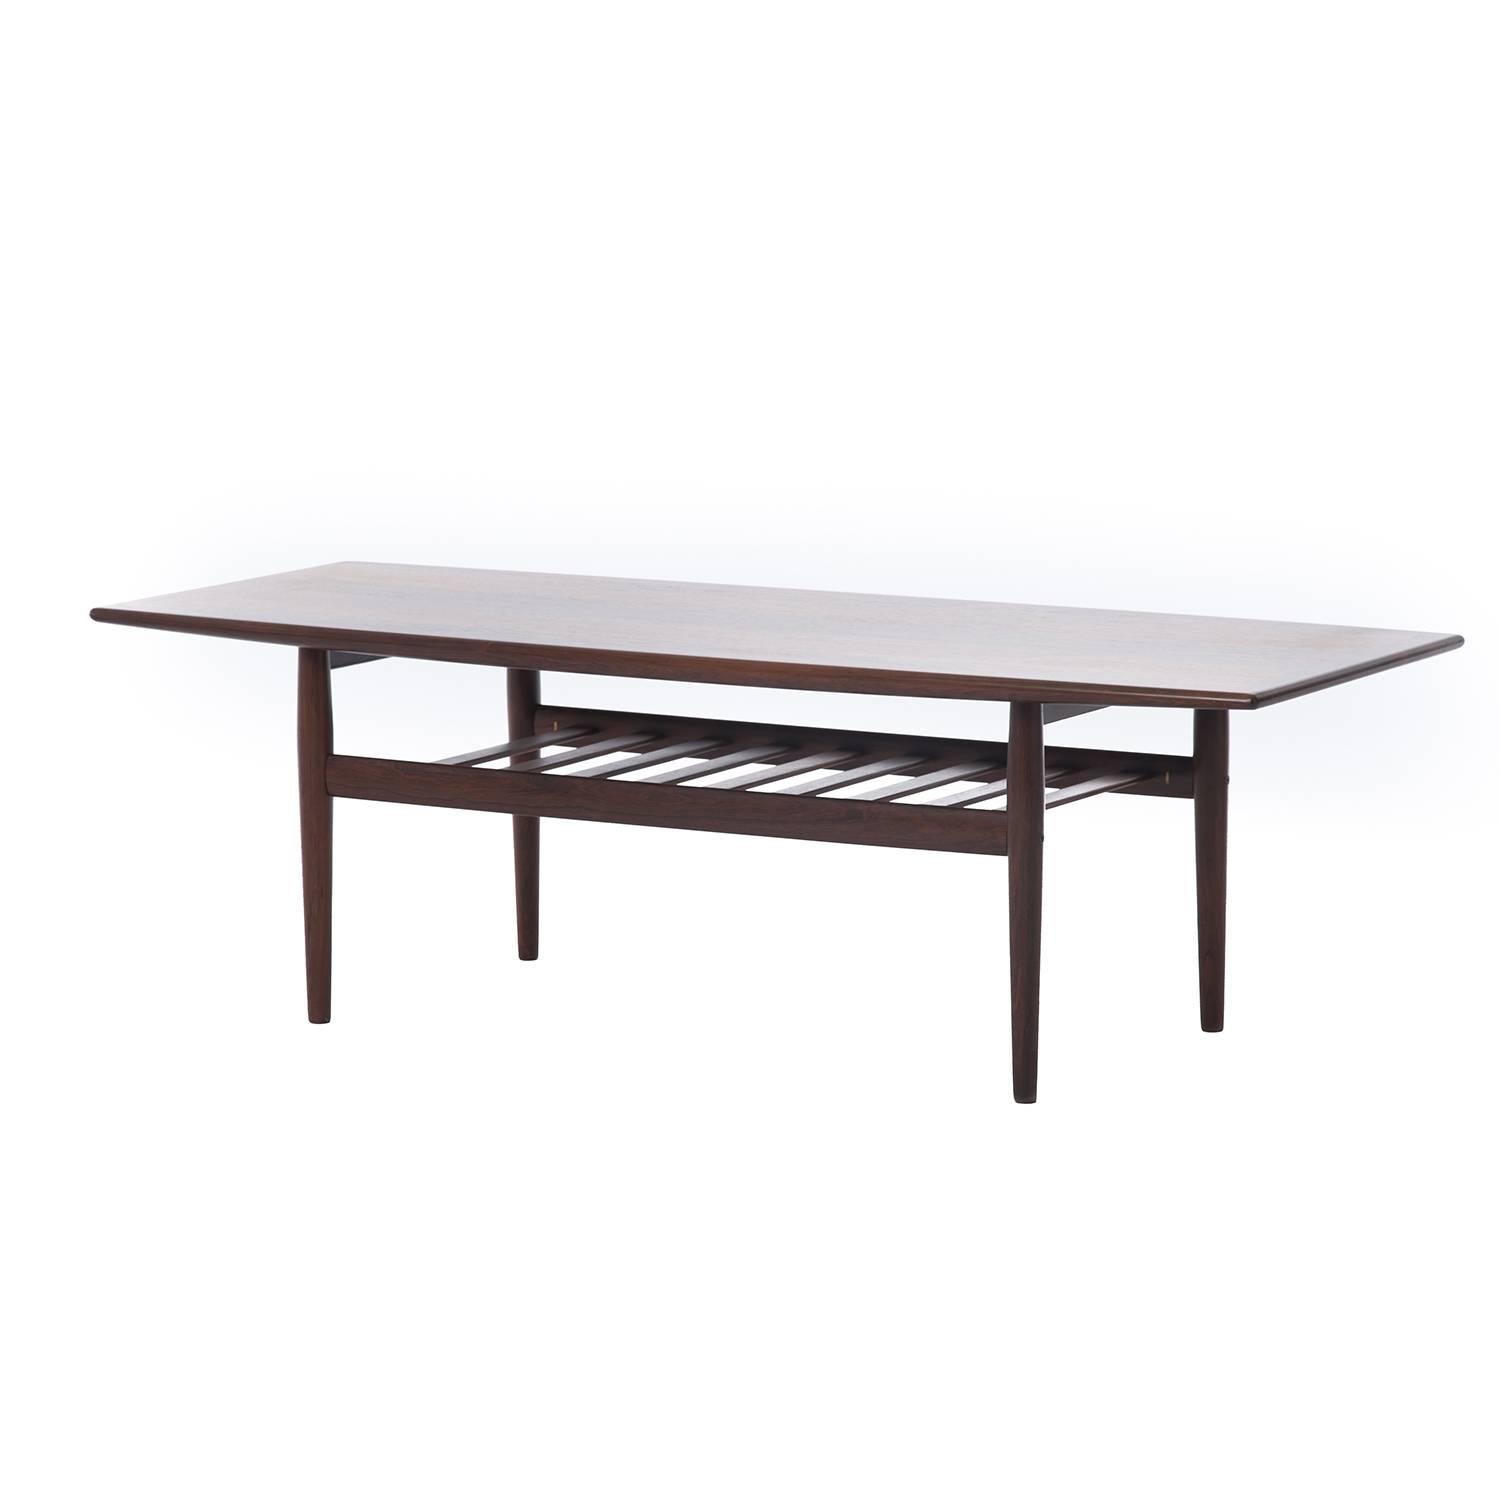 Lacquered Danish Modern Rosewood Coffee Table with Shelf